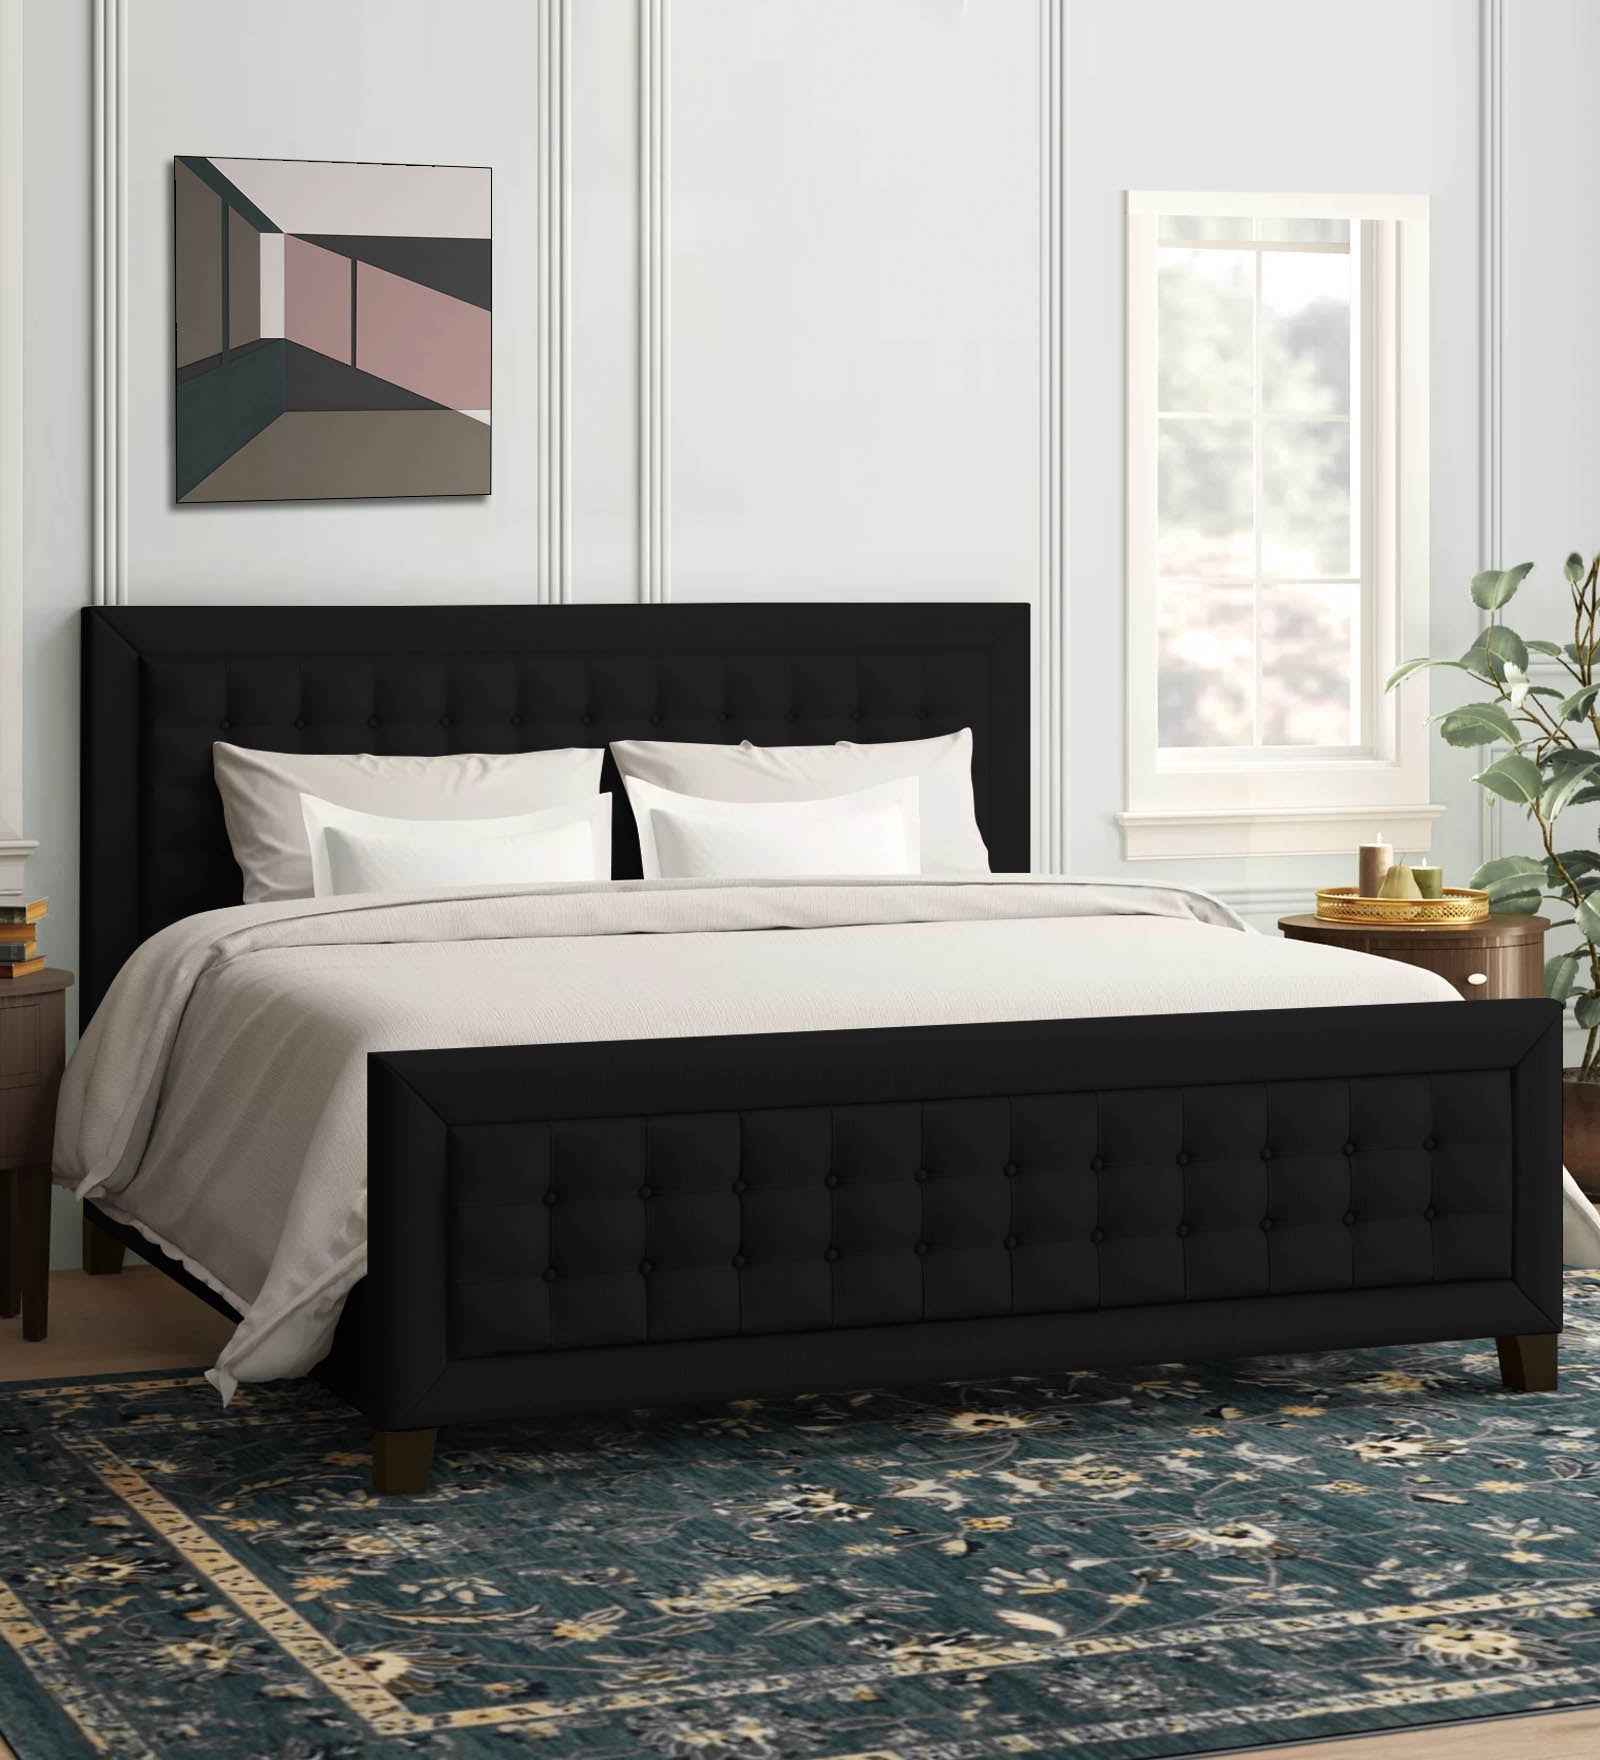 Kaster Fabric King Size Bed In Zed Black Colour